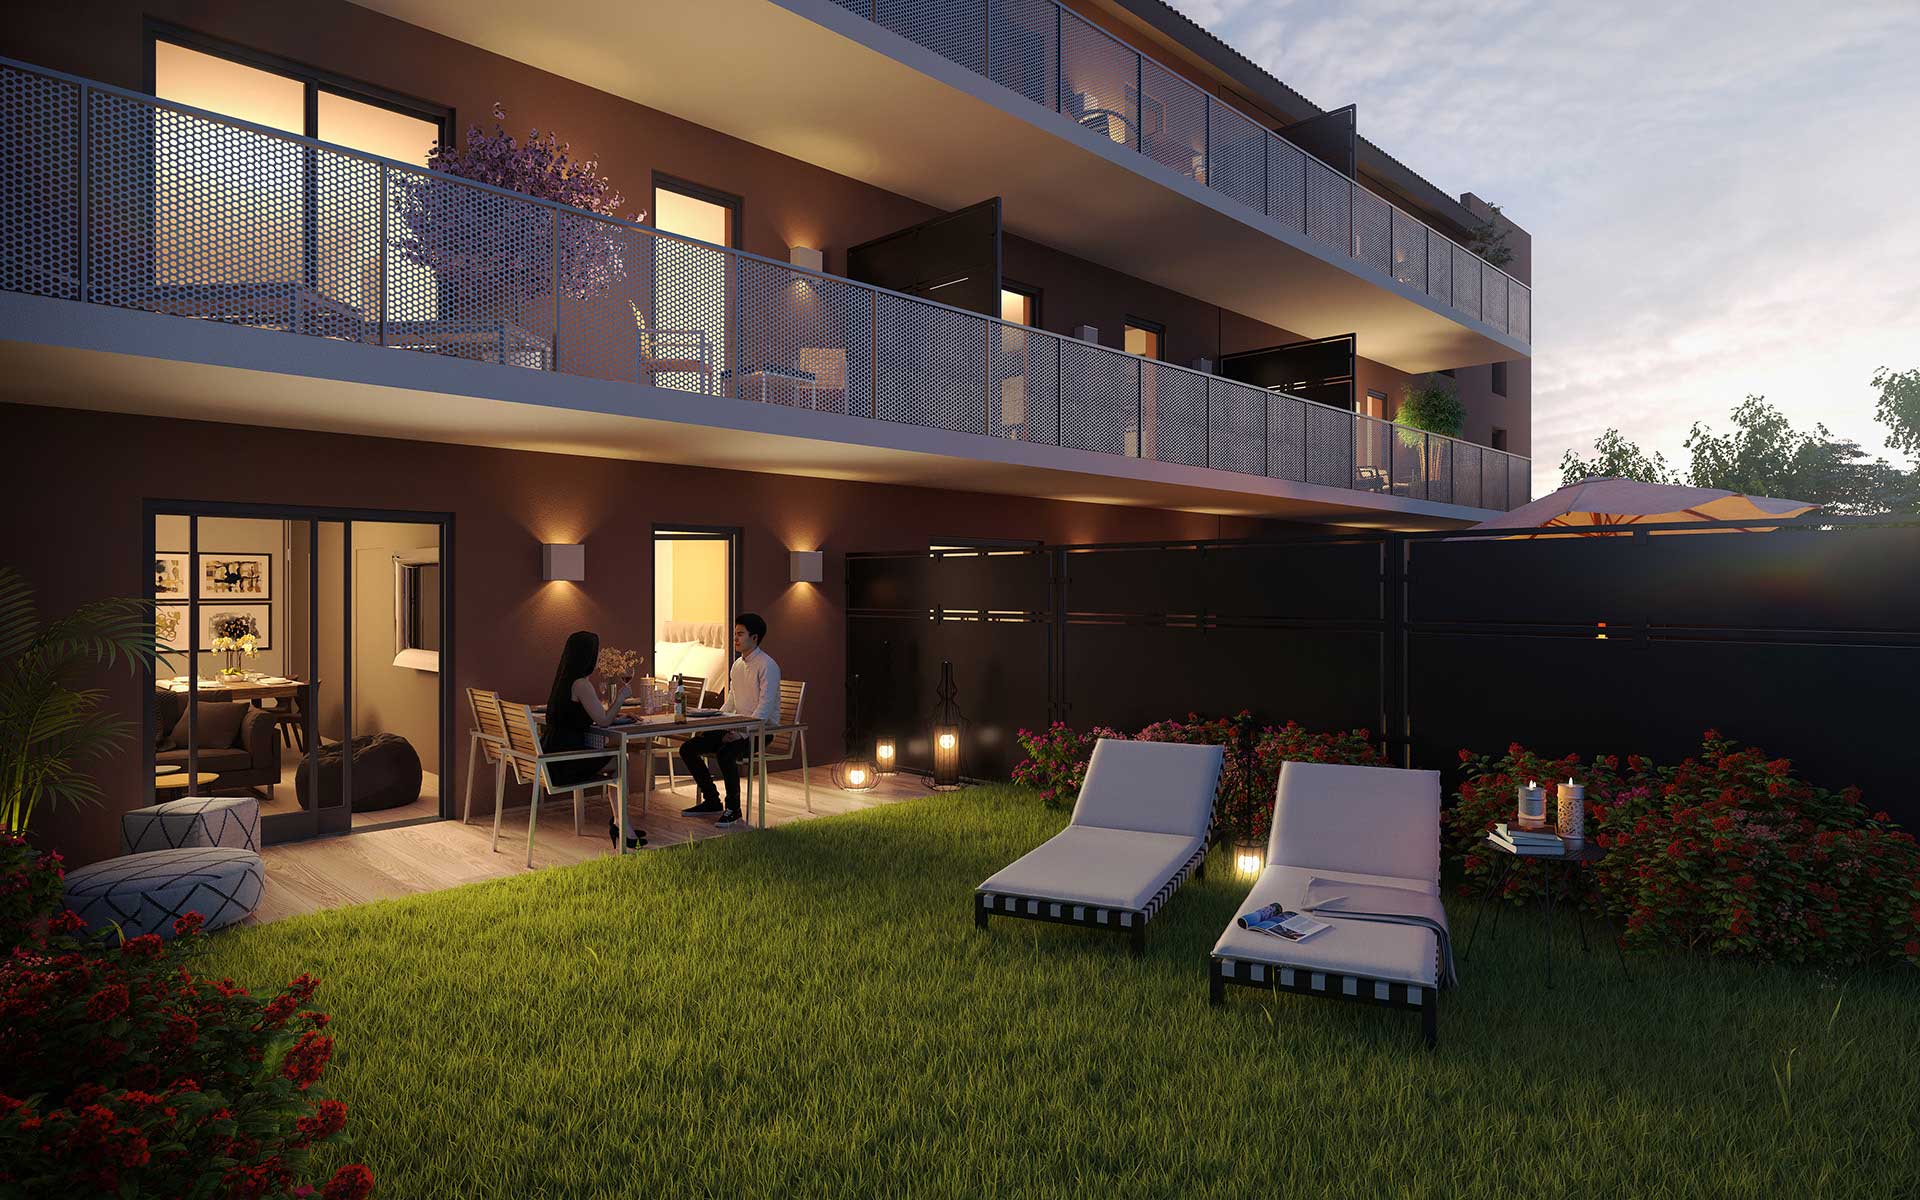 3D Perspective of a building and a night garden - real estate promotion.